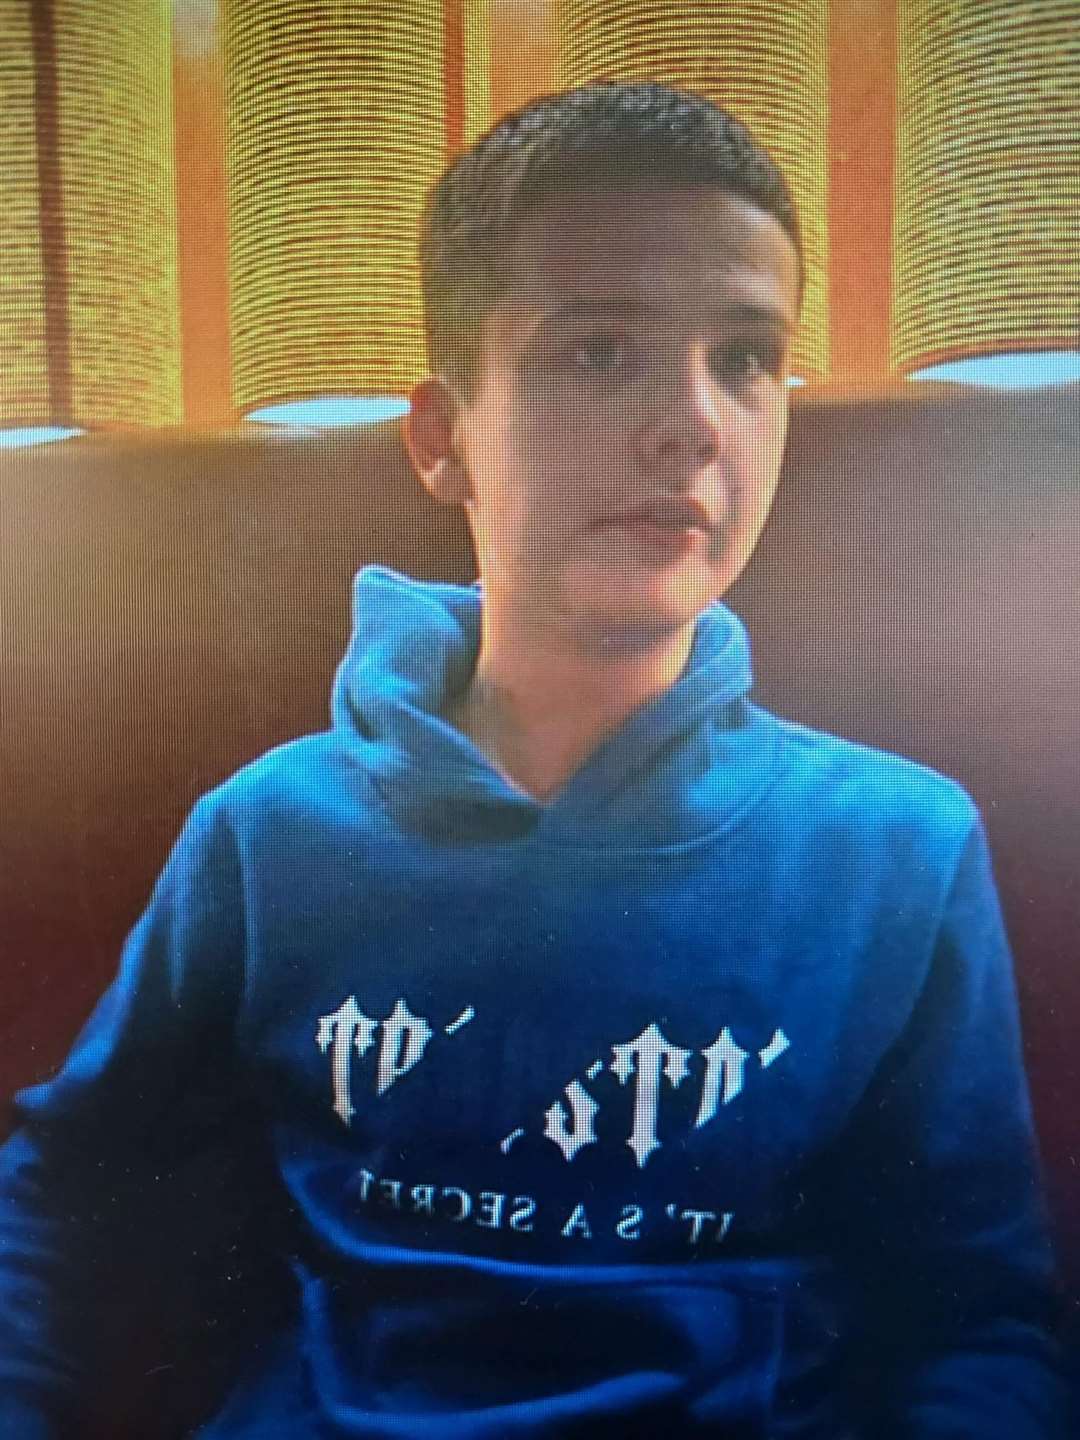 Nico Adams (16) has been posted missing, prompting a police appeal for help to trace him.